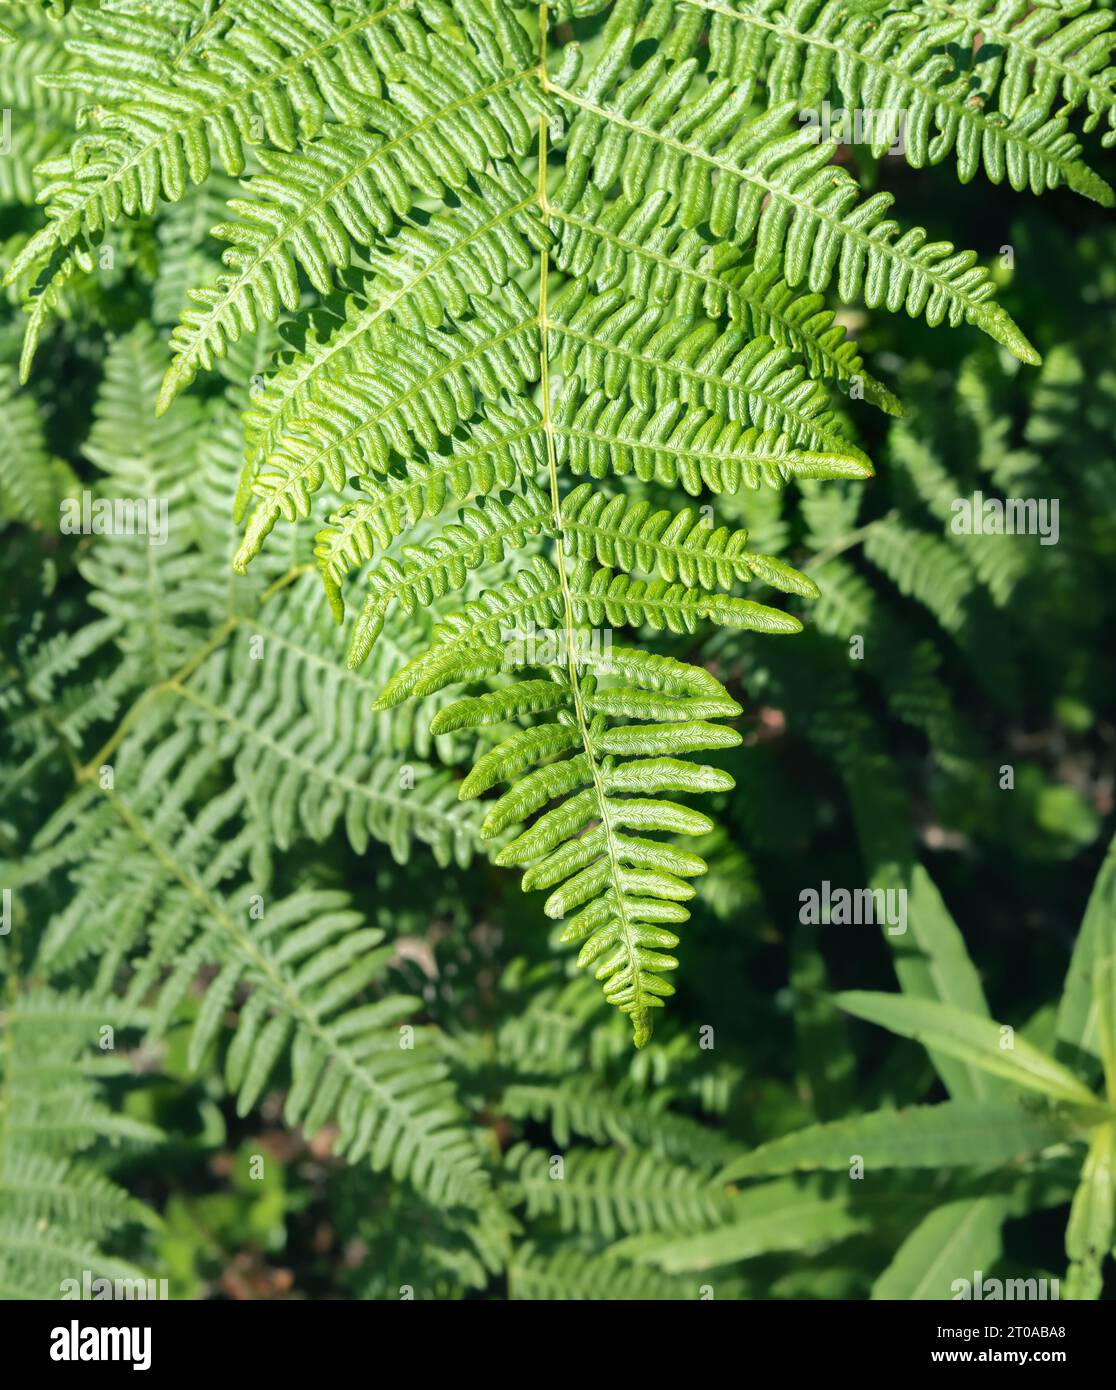 Bracken fern growing. Top view of large fern fronds with defocused foliage. Nature forest background texture. Grows very tall in forests, meadows and Stock Photo